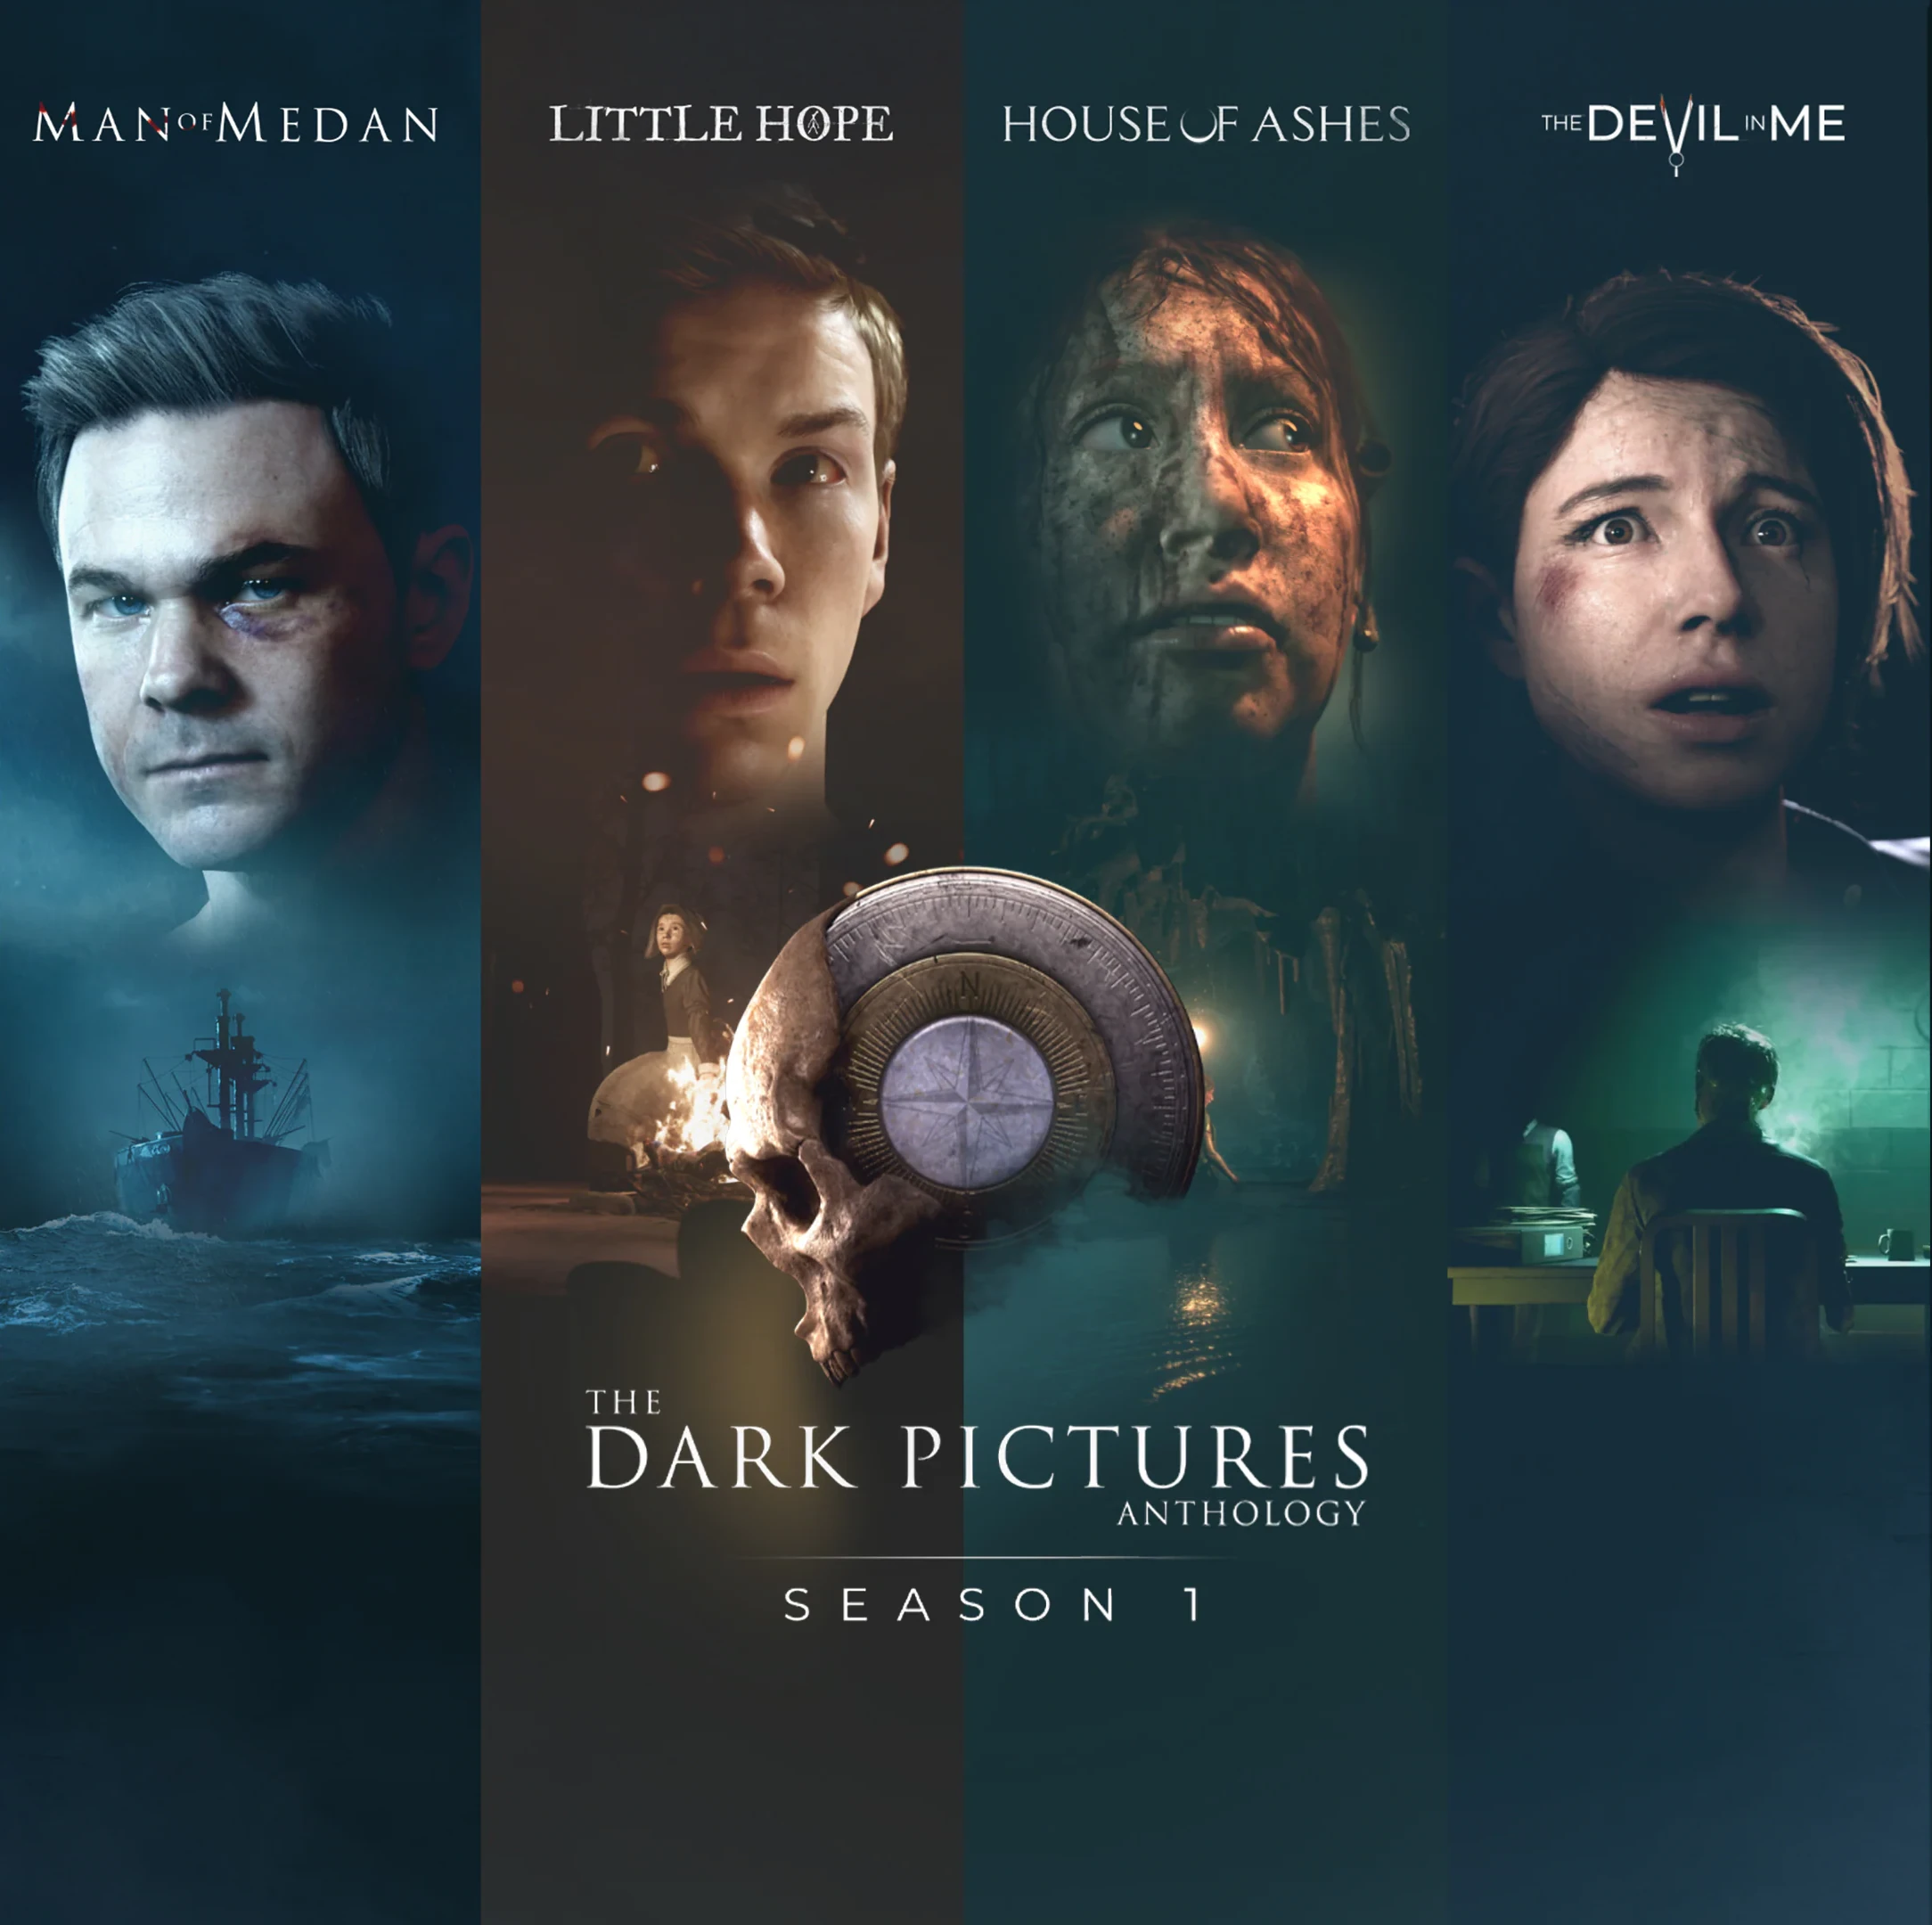 The Dark Pictures Anthology - Saison 1 : Man of Medan + Little Hope + House of Ashes + The Devil in Me